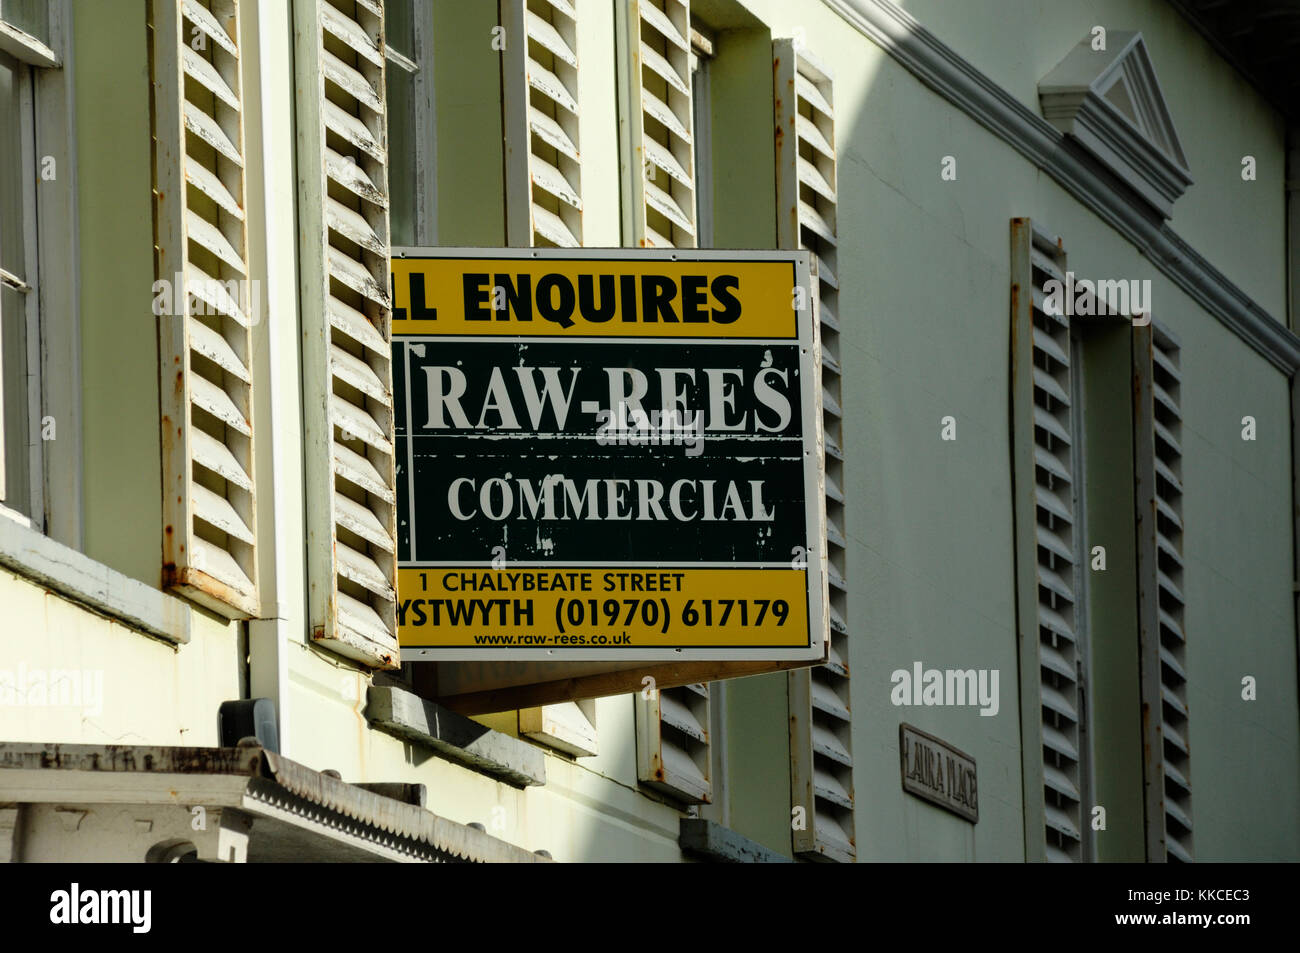 Commercial property for sale or rent in Aberystwyth, Wales Stock Photo